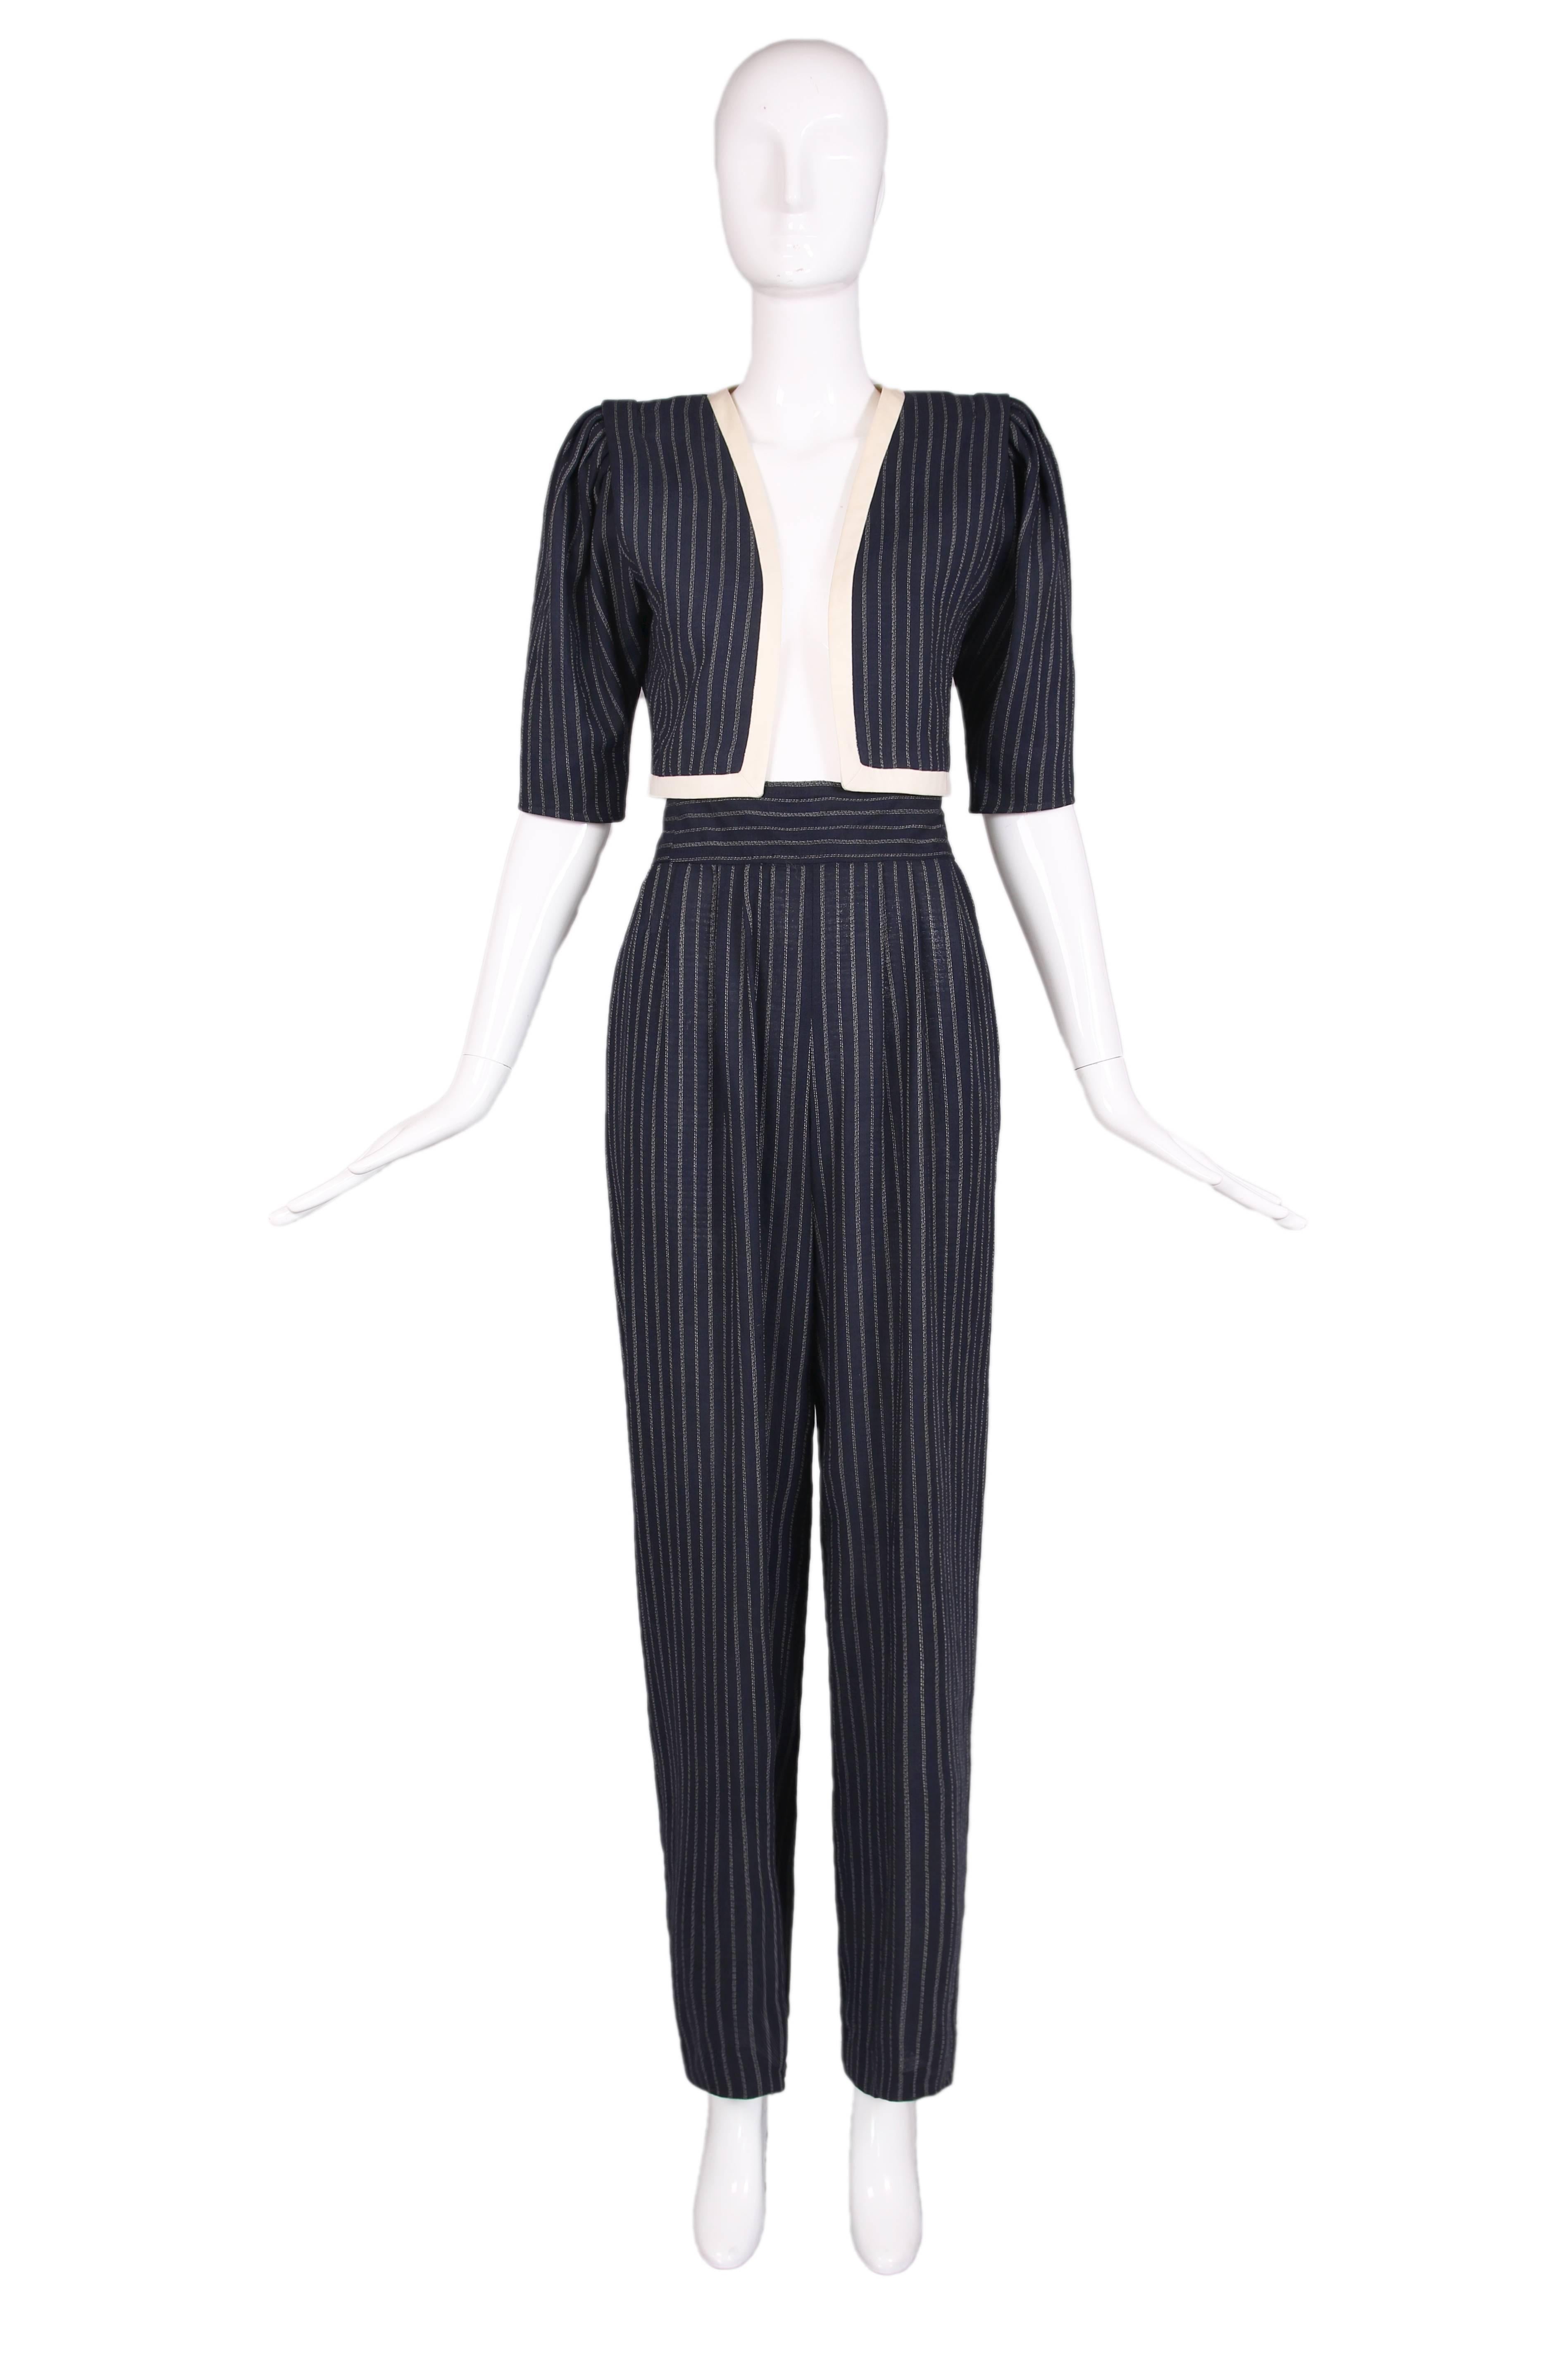 Vintage Emanuel Ungaro navy blue pinstriped crepe two piece ensemble. Fitted cropped jacket has cream colored trim and no closures. High-waisted trouser pants have two side pockets, pleating, and waistband with horizontal pinstripes. In excellent